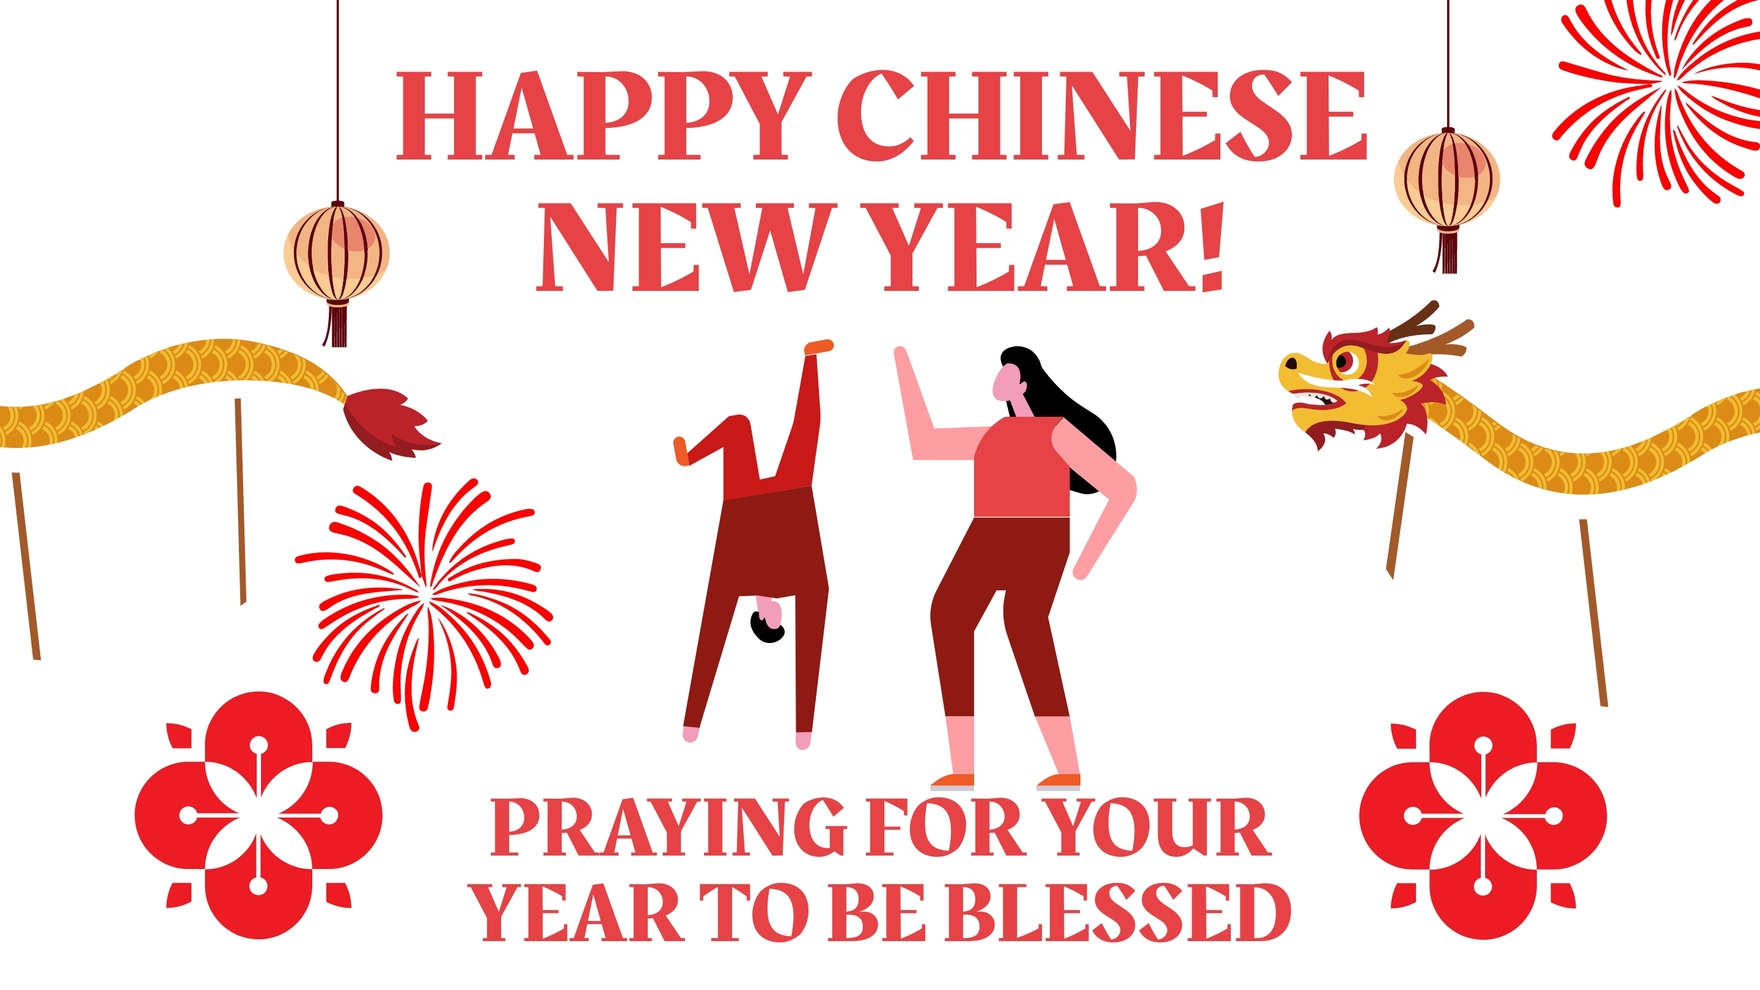 Chinese New Year Greeting Card Background in PDF, Illustrator, PSD, EPS, SVG, JPG, PNG